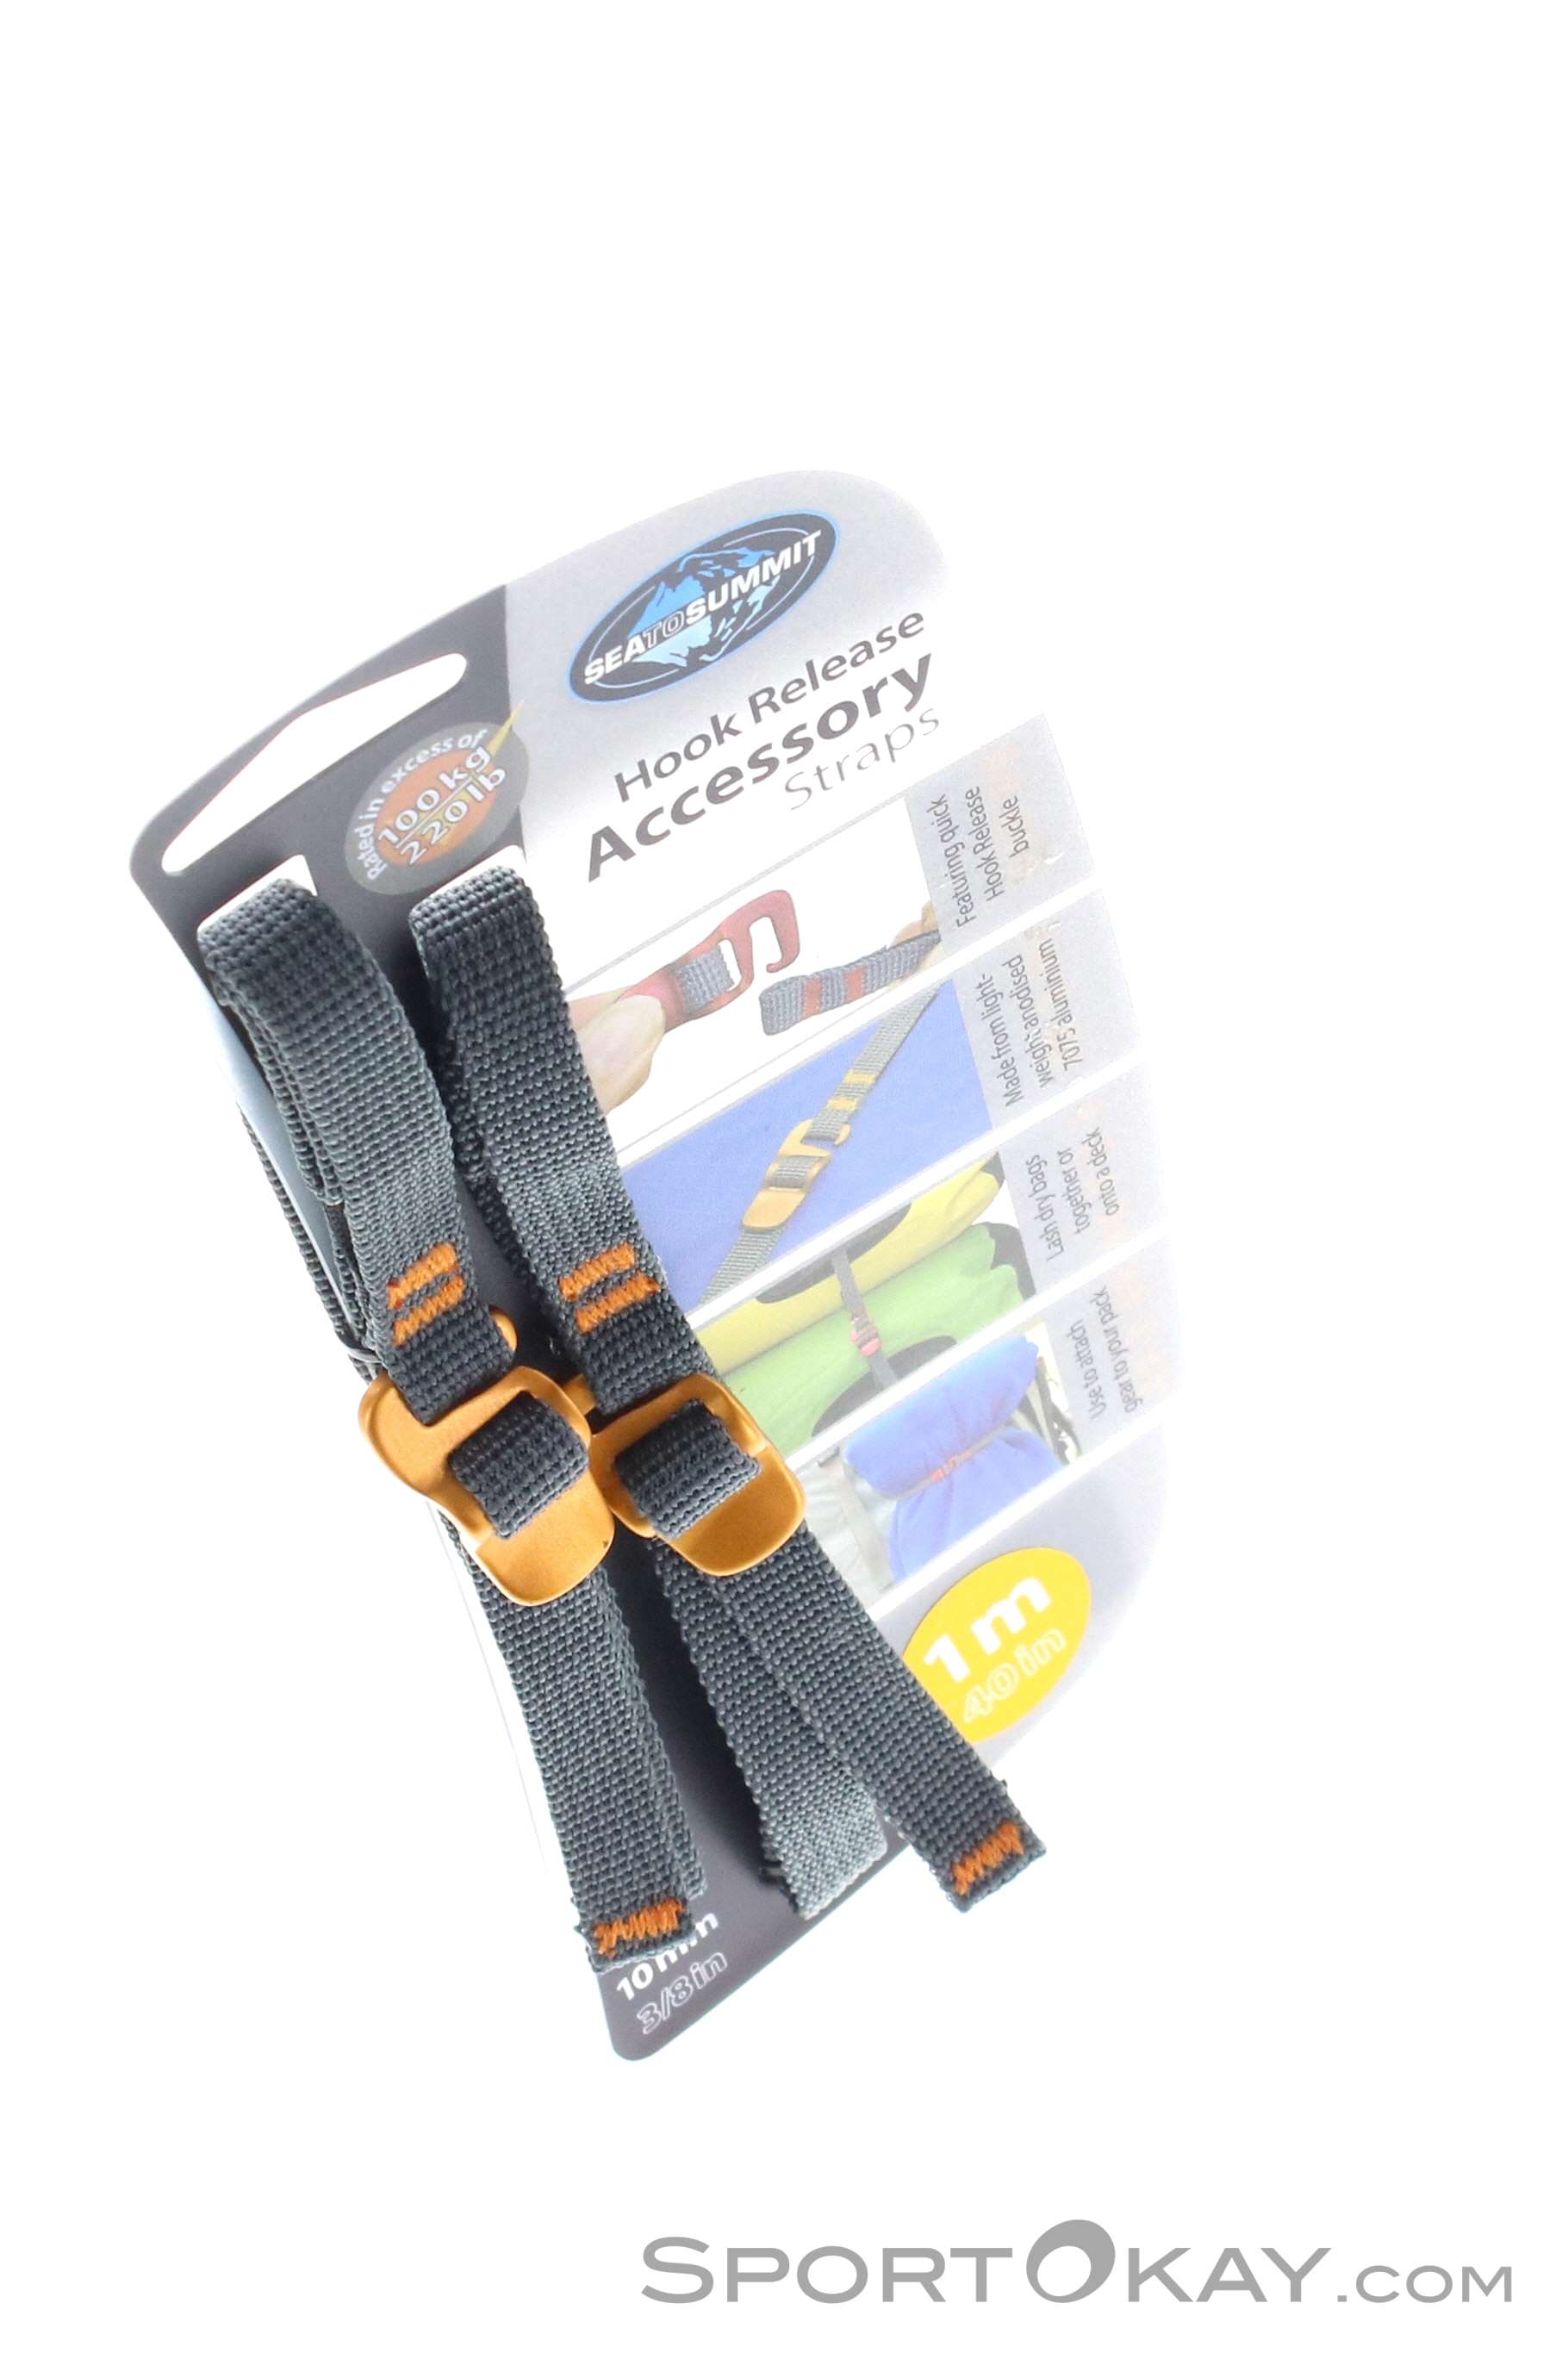 Sea to Summit Hook Release 3/8 Accessory Straps, Orange/Gray - 2 pack